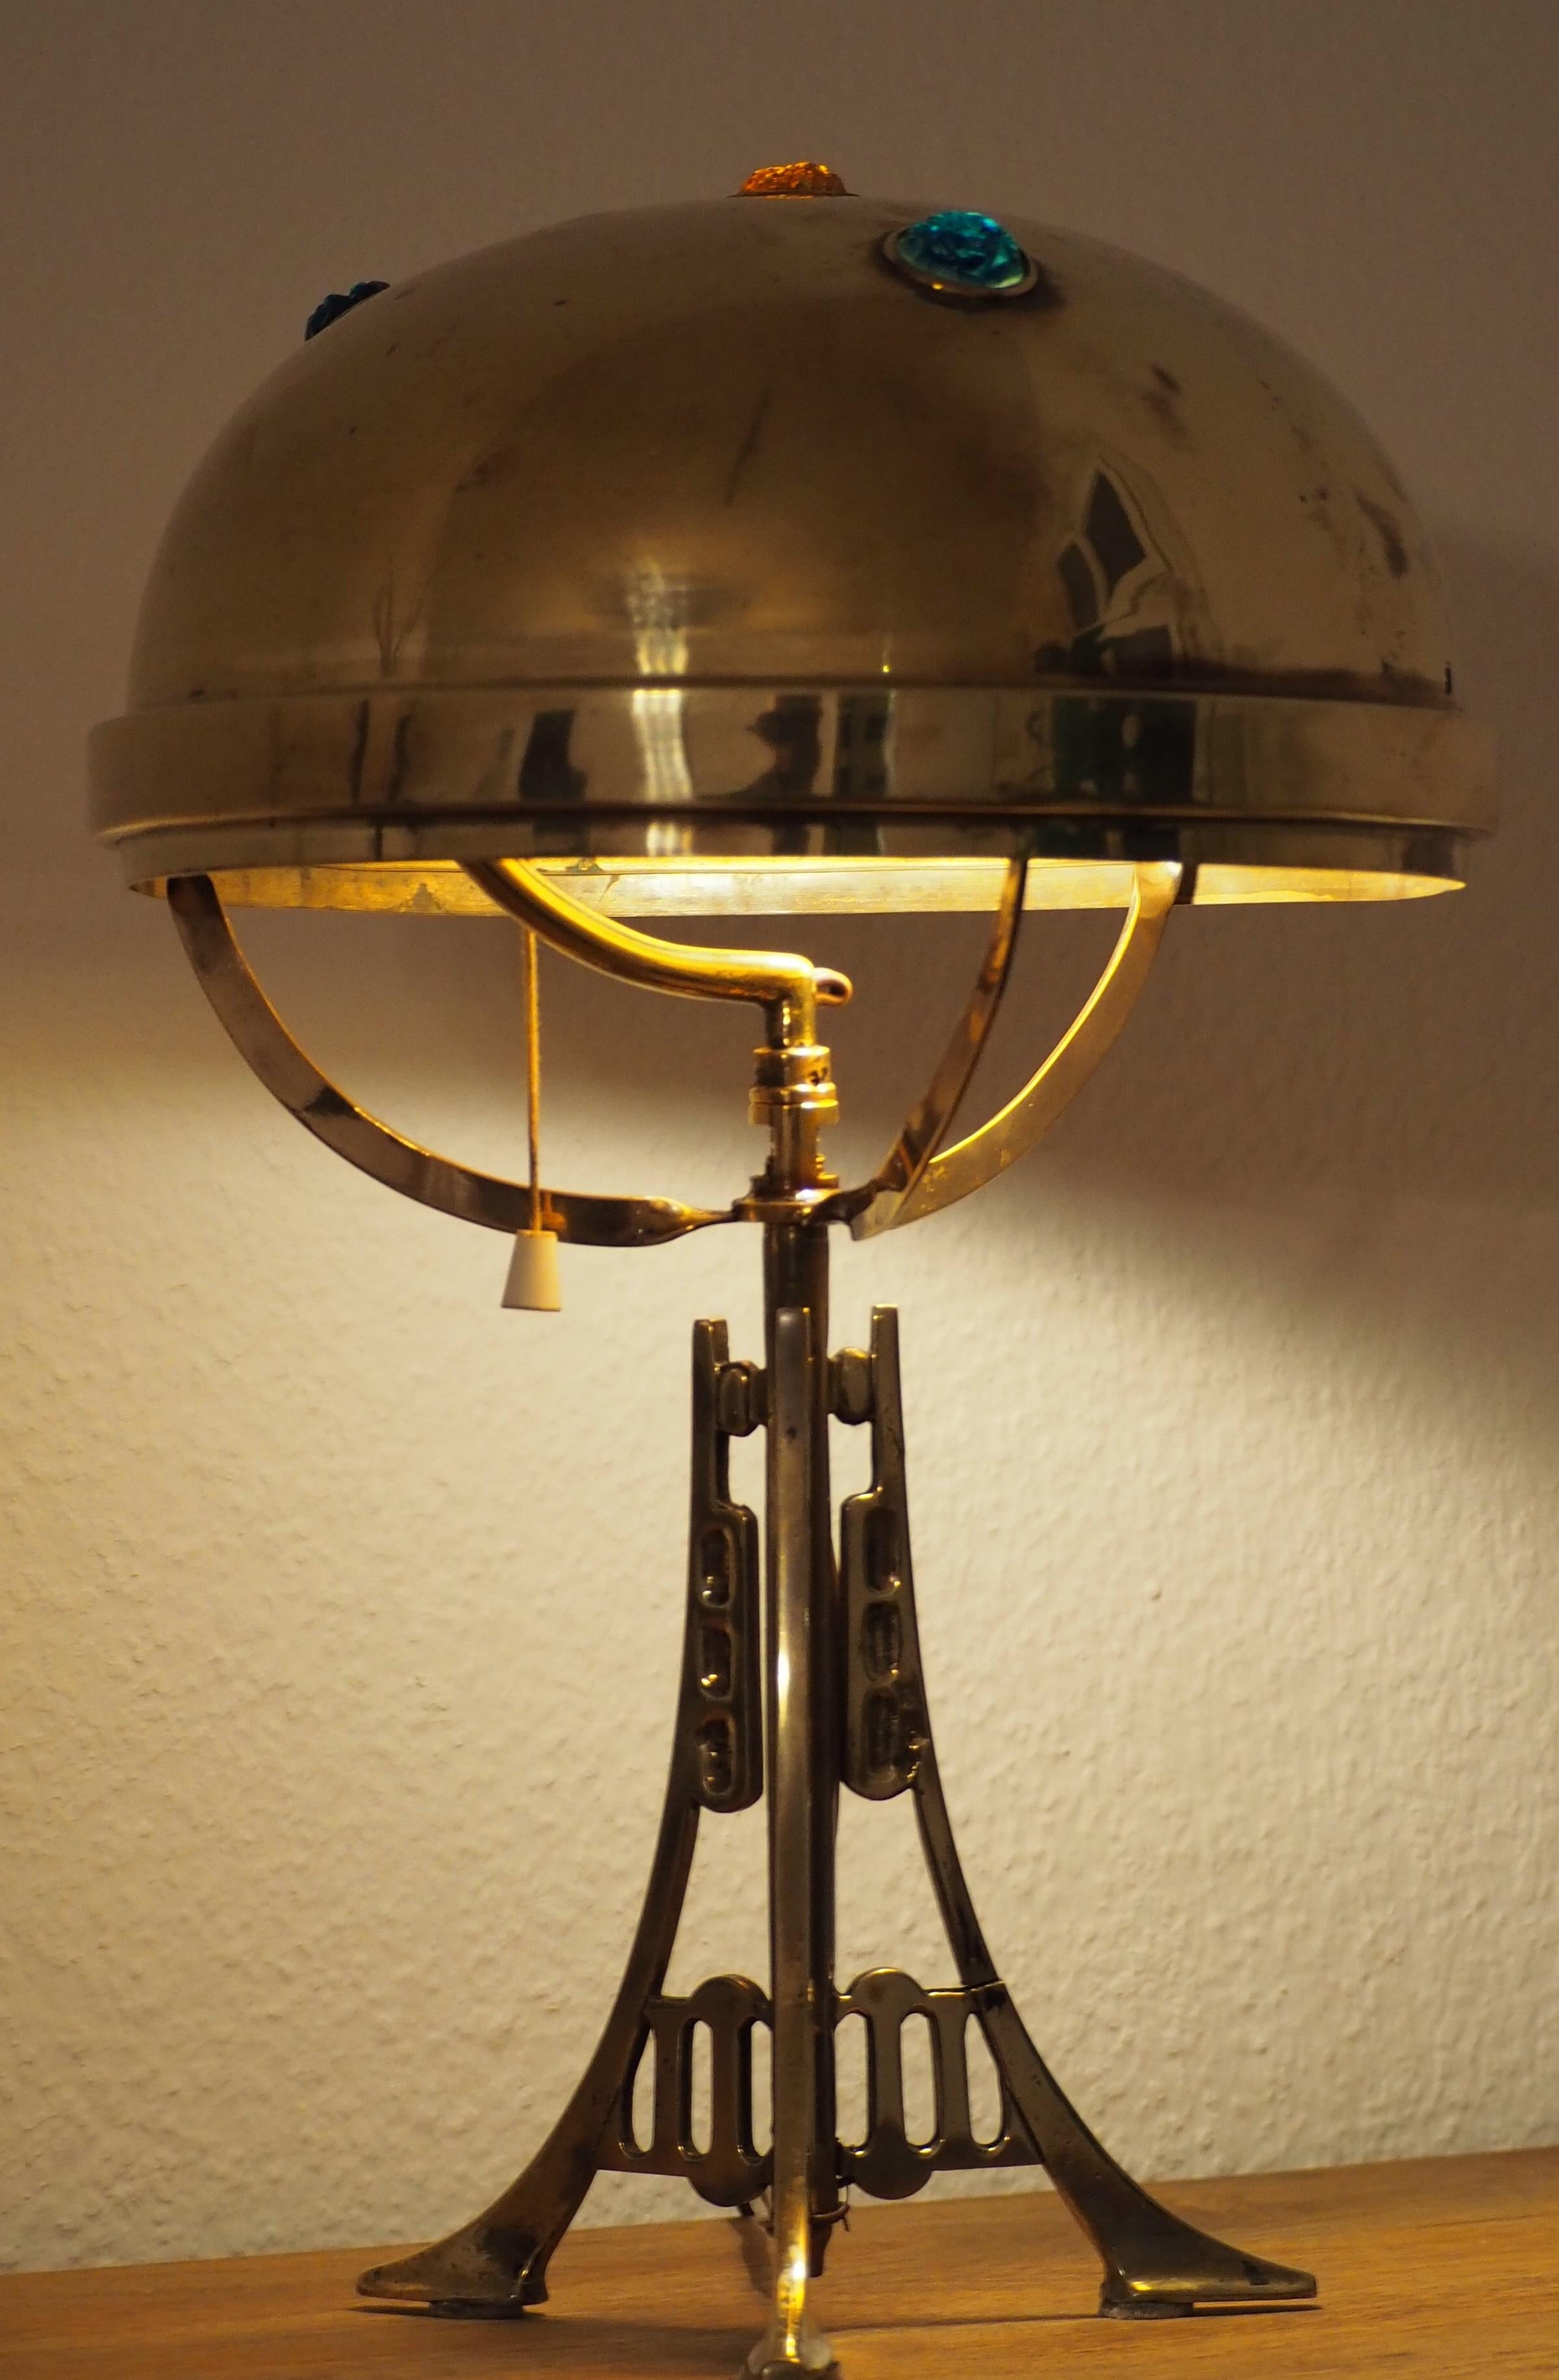 A wonderful Art Nouveau brass and glass jewel table lamp, circa 1900.
Socket: One x e 27
Newly wired.